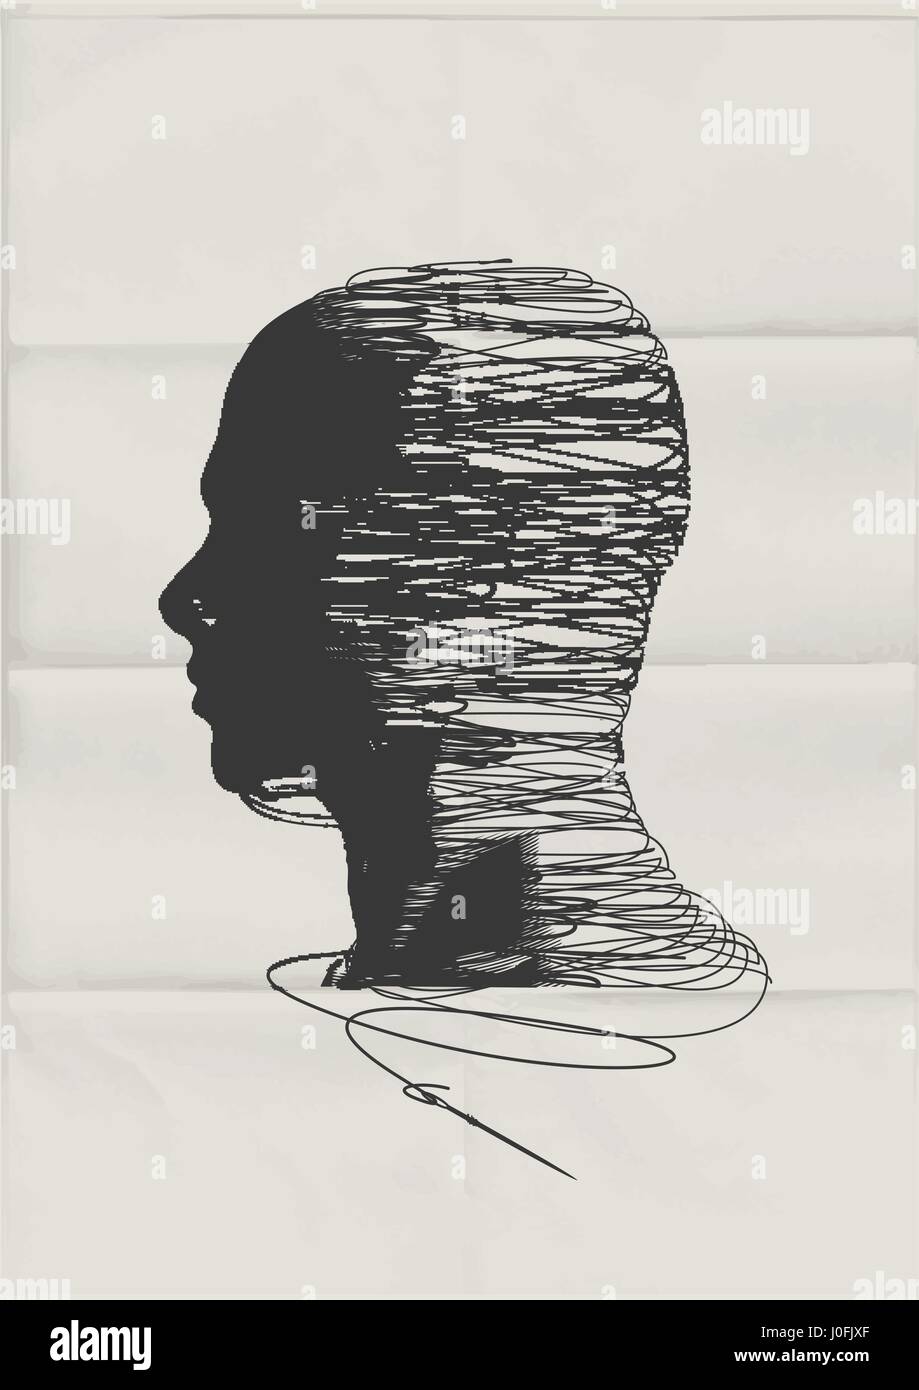 The Human Mind. The shape of a man's head tangled up with threads of string - mental health concept. Stock Vector